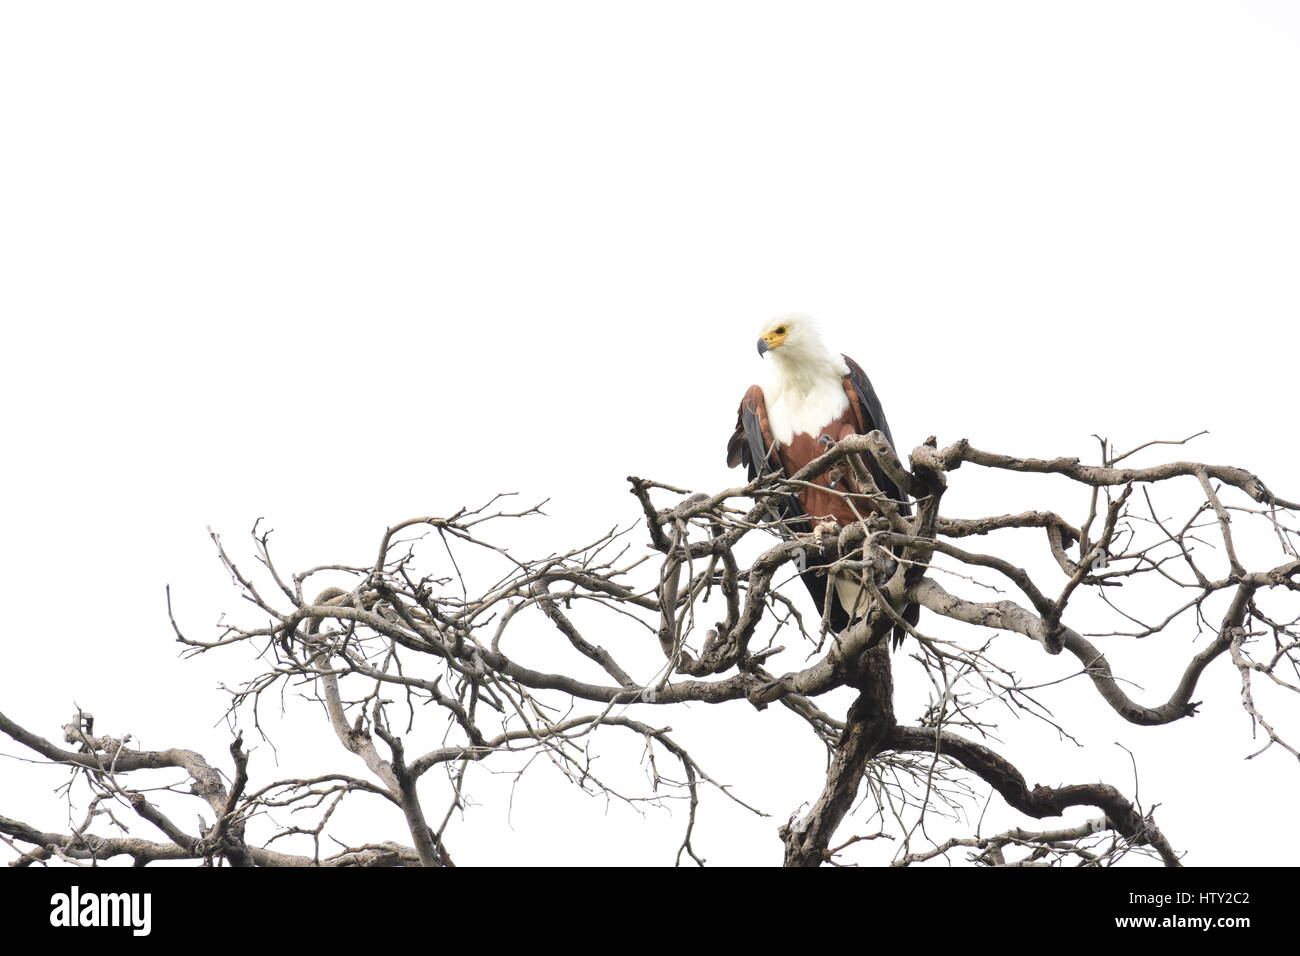 Fish eagle on a branch in Botswana Stock Photo